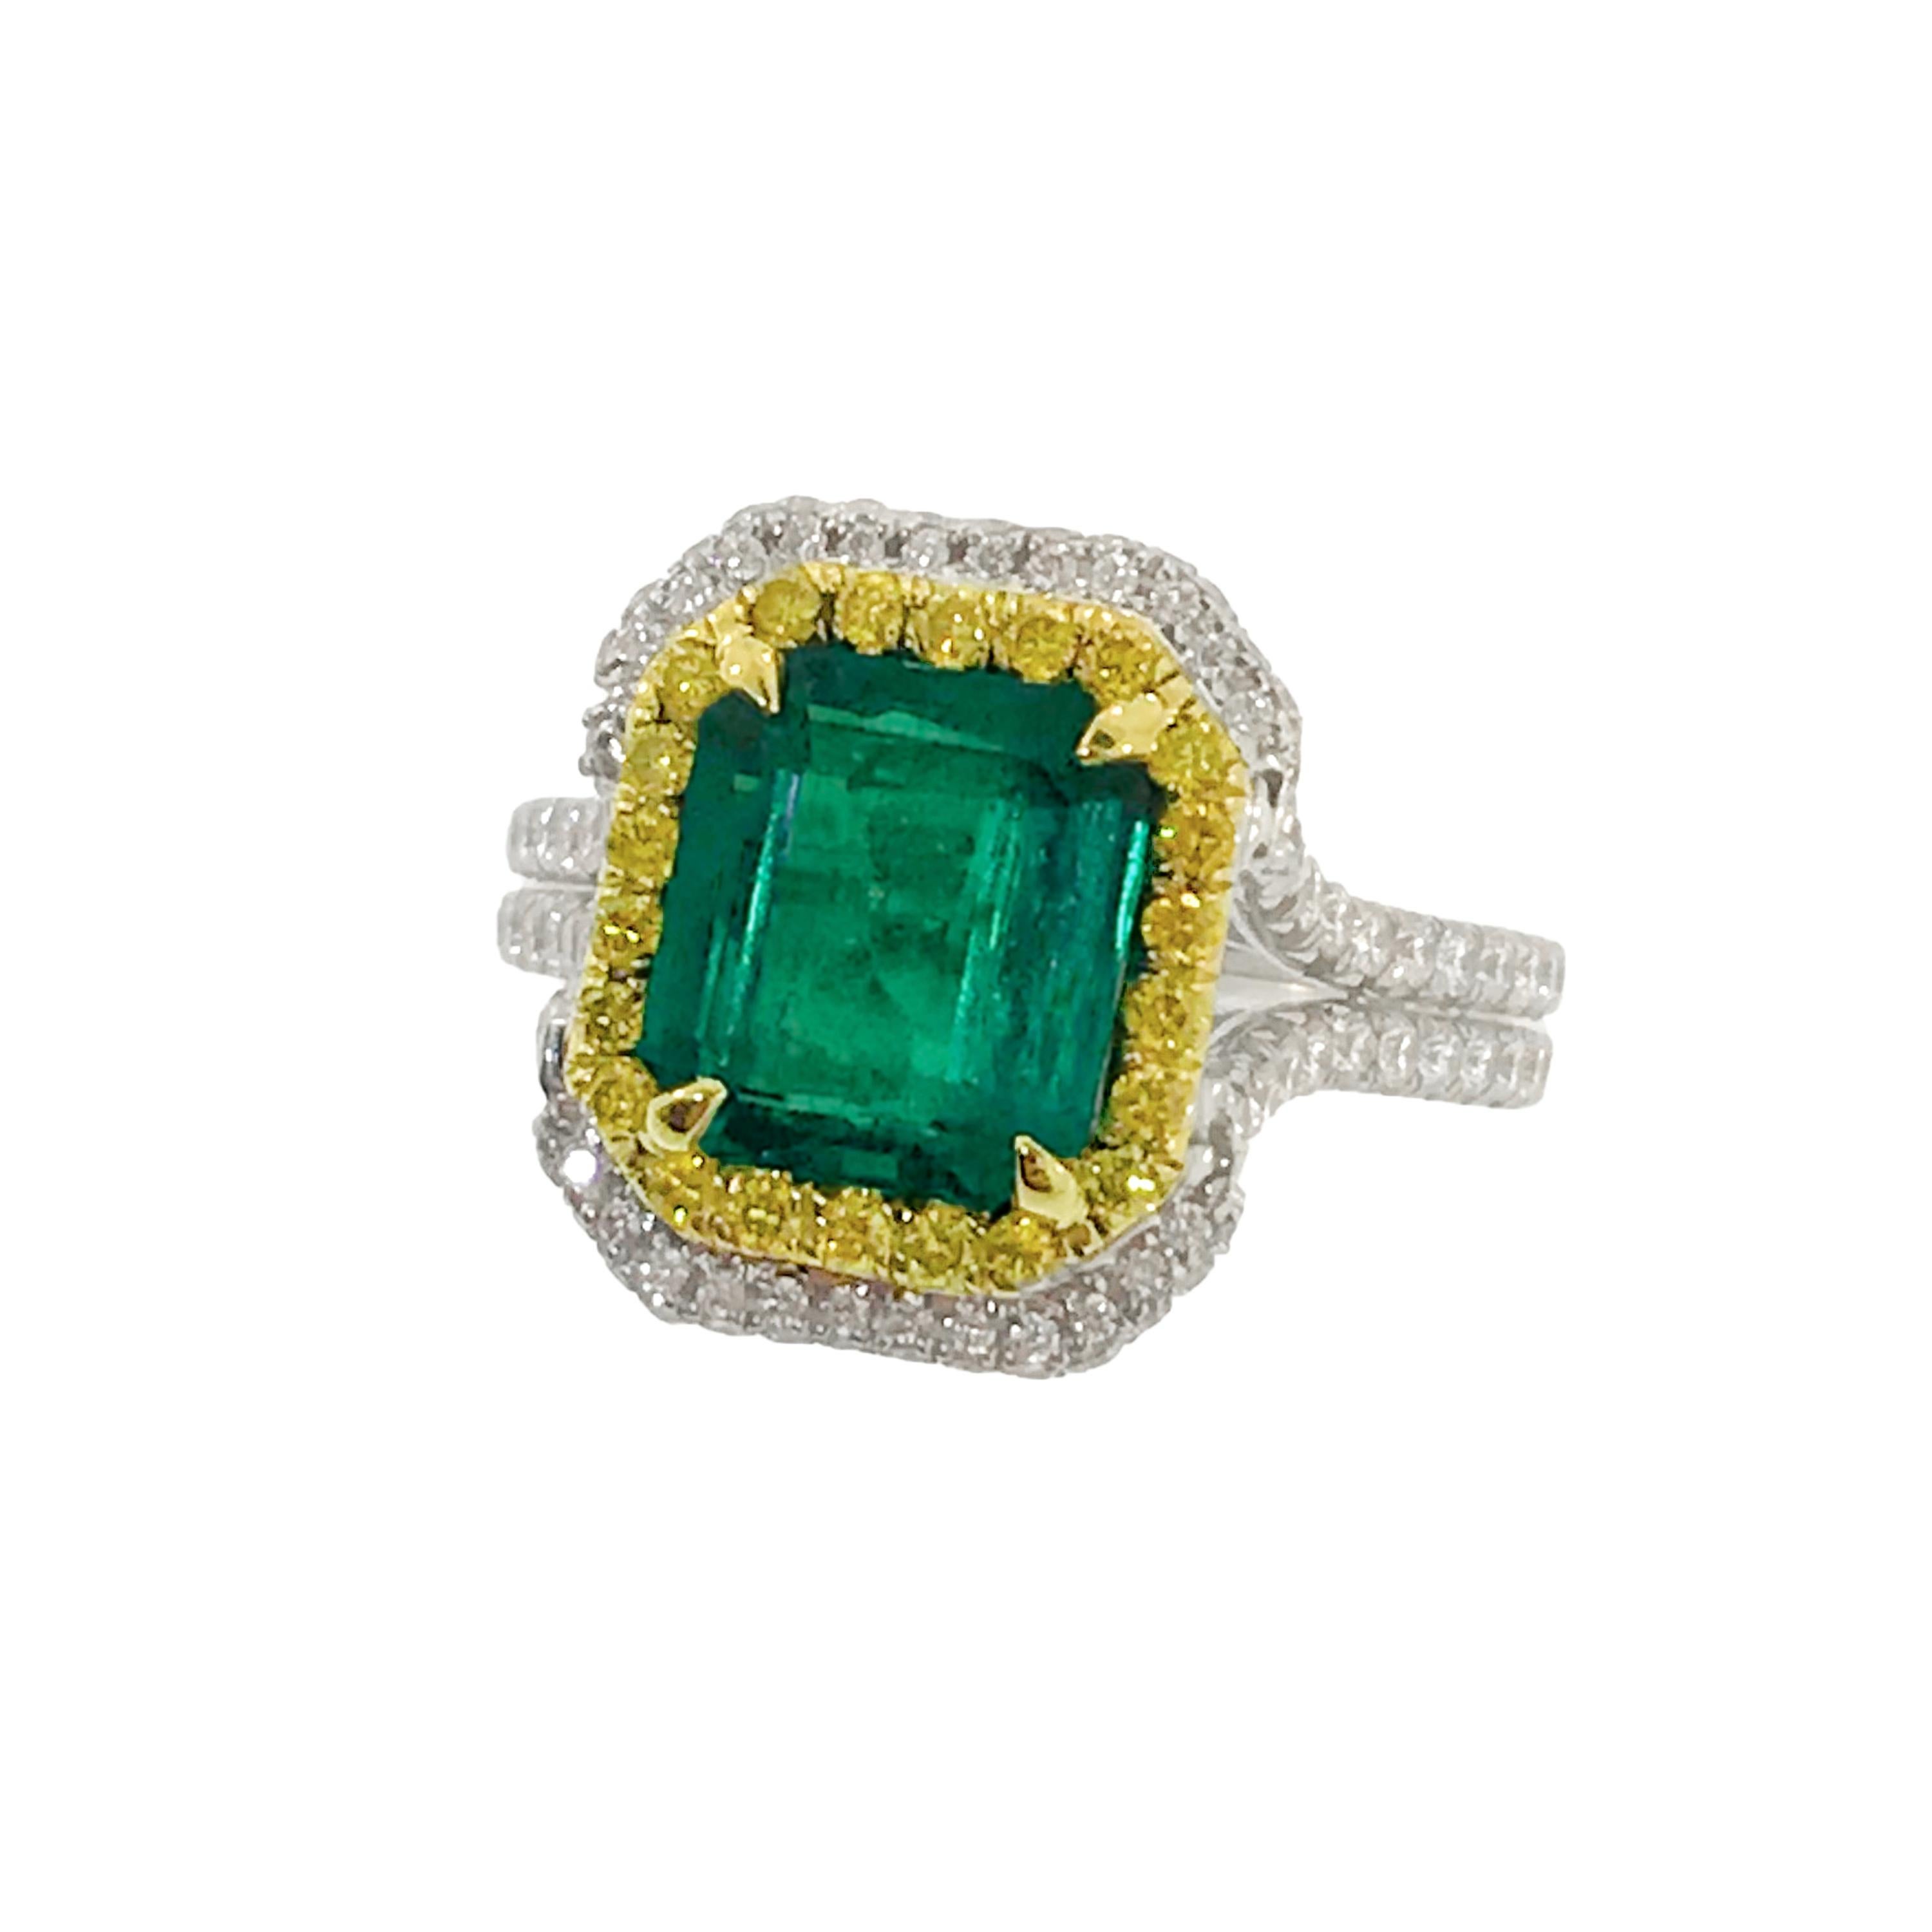 This great ring is of Platinum and 18K Yellow Gold. The 2.76 Carat Colombian Emerald (Colombian Emeralds are considered the 'Rolls Royce' of Emeralds) is of excellent quality exhibiting a deeply saturated Green Color and outstanding transparency! 